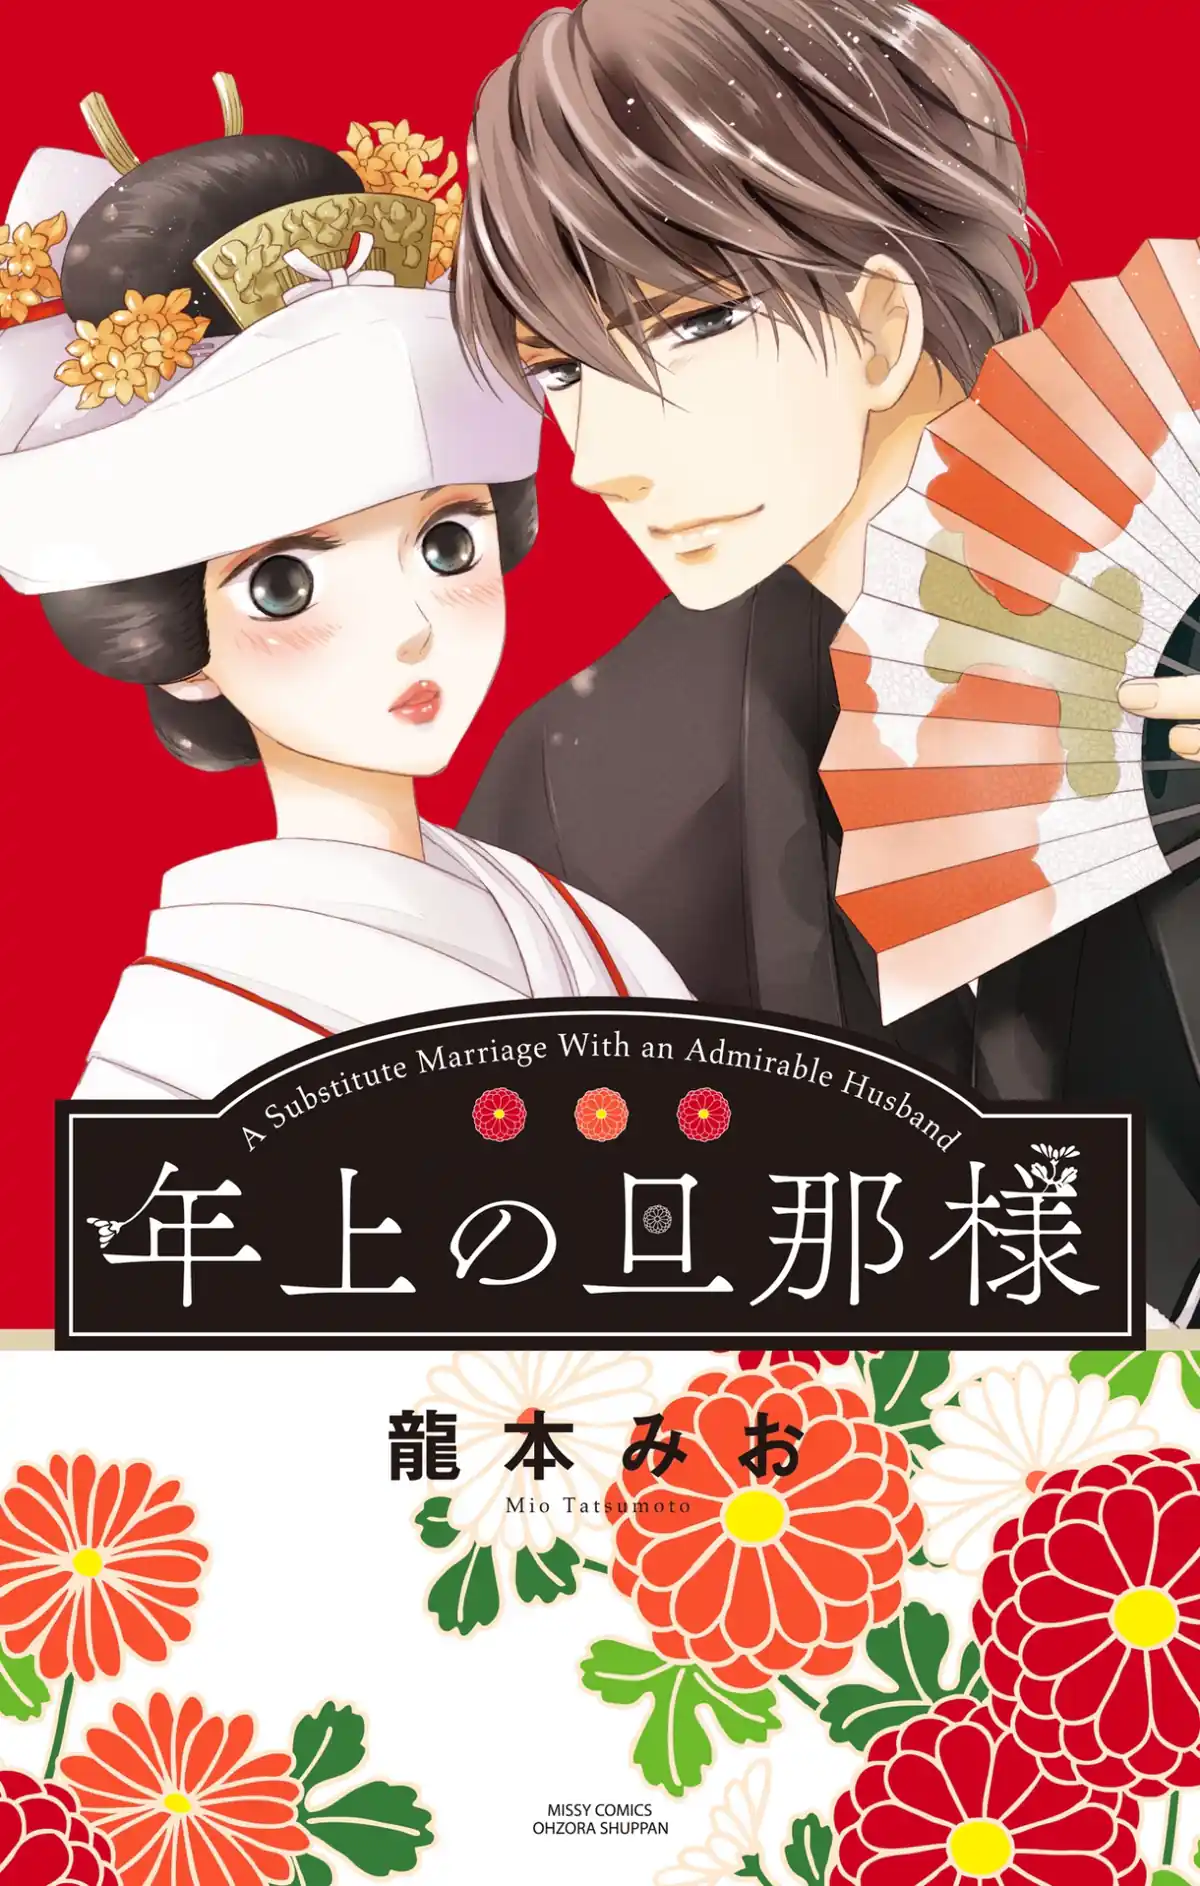 Manga Planet’s September 2023 Title Picks: A Substitute Marriage With an Admirable Husband